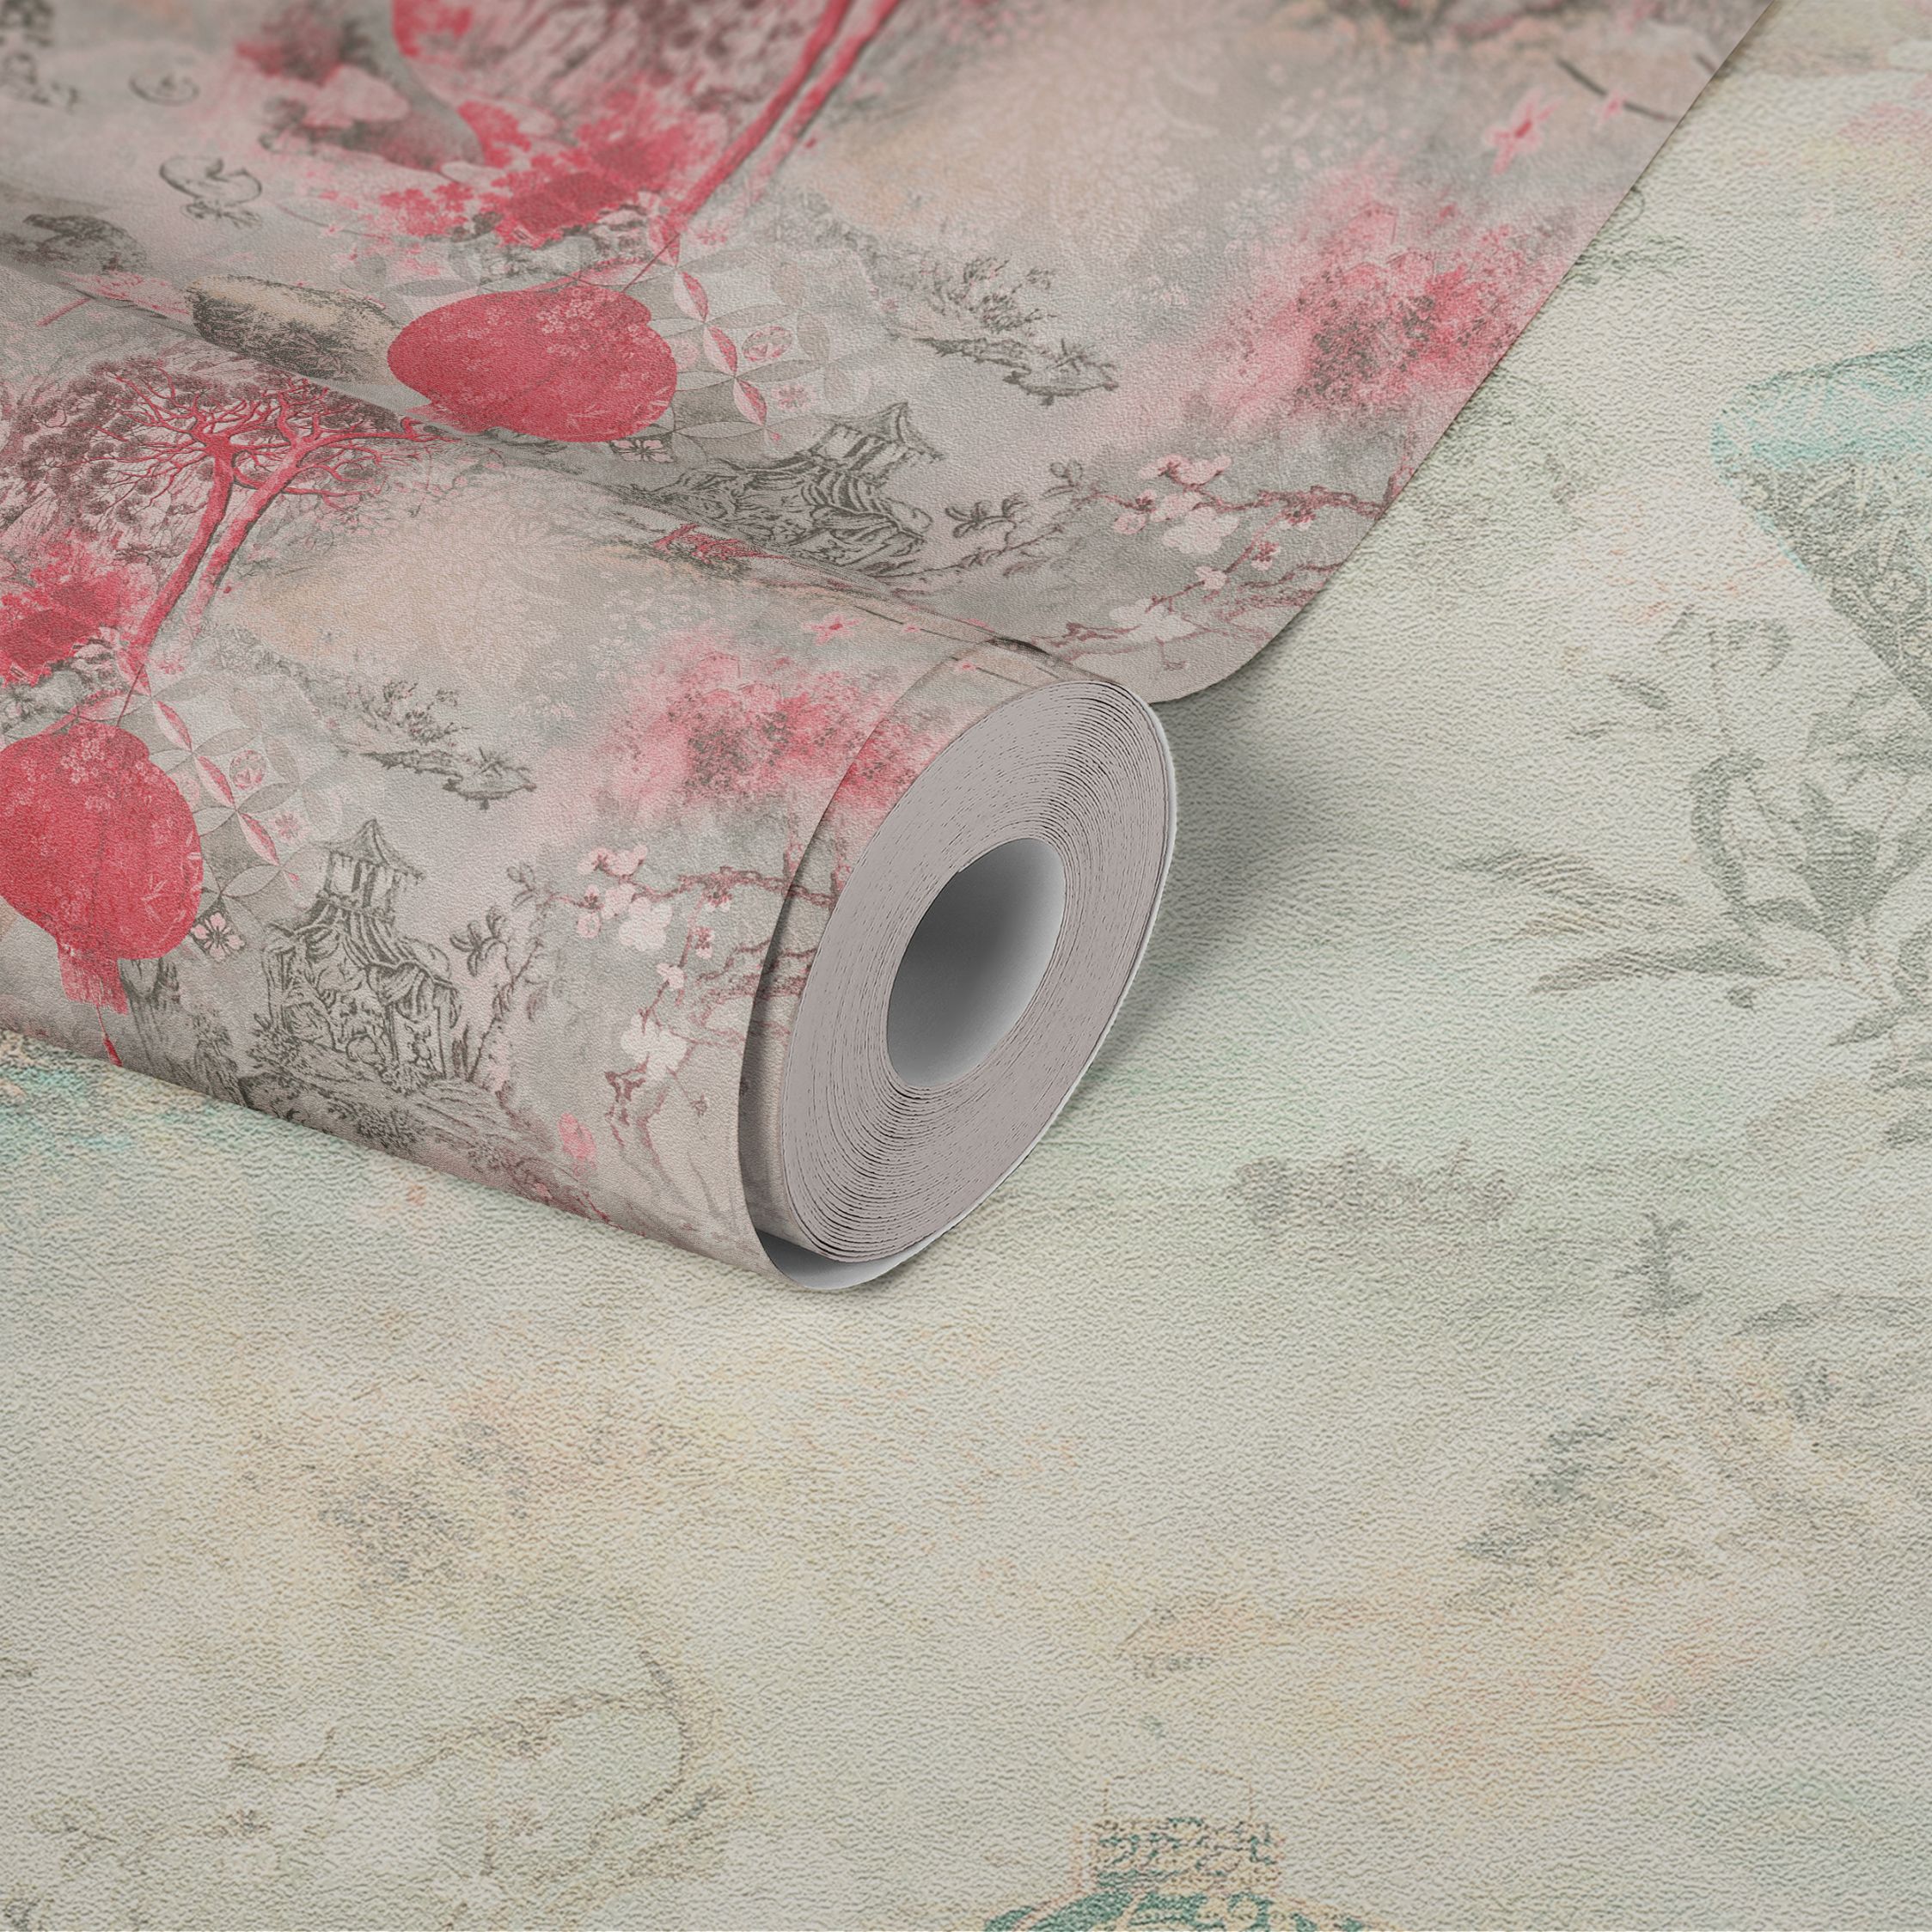 Example of faded wallpaper with bleached colours